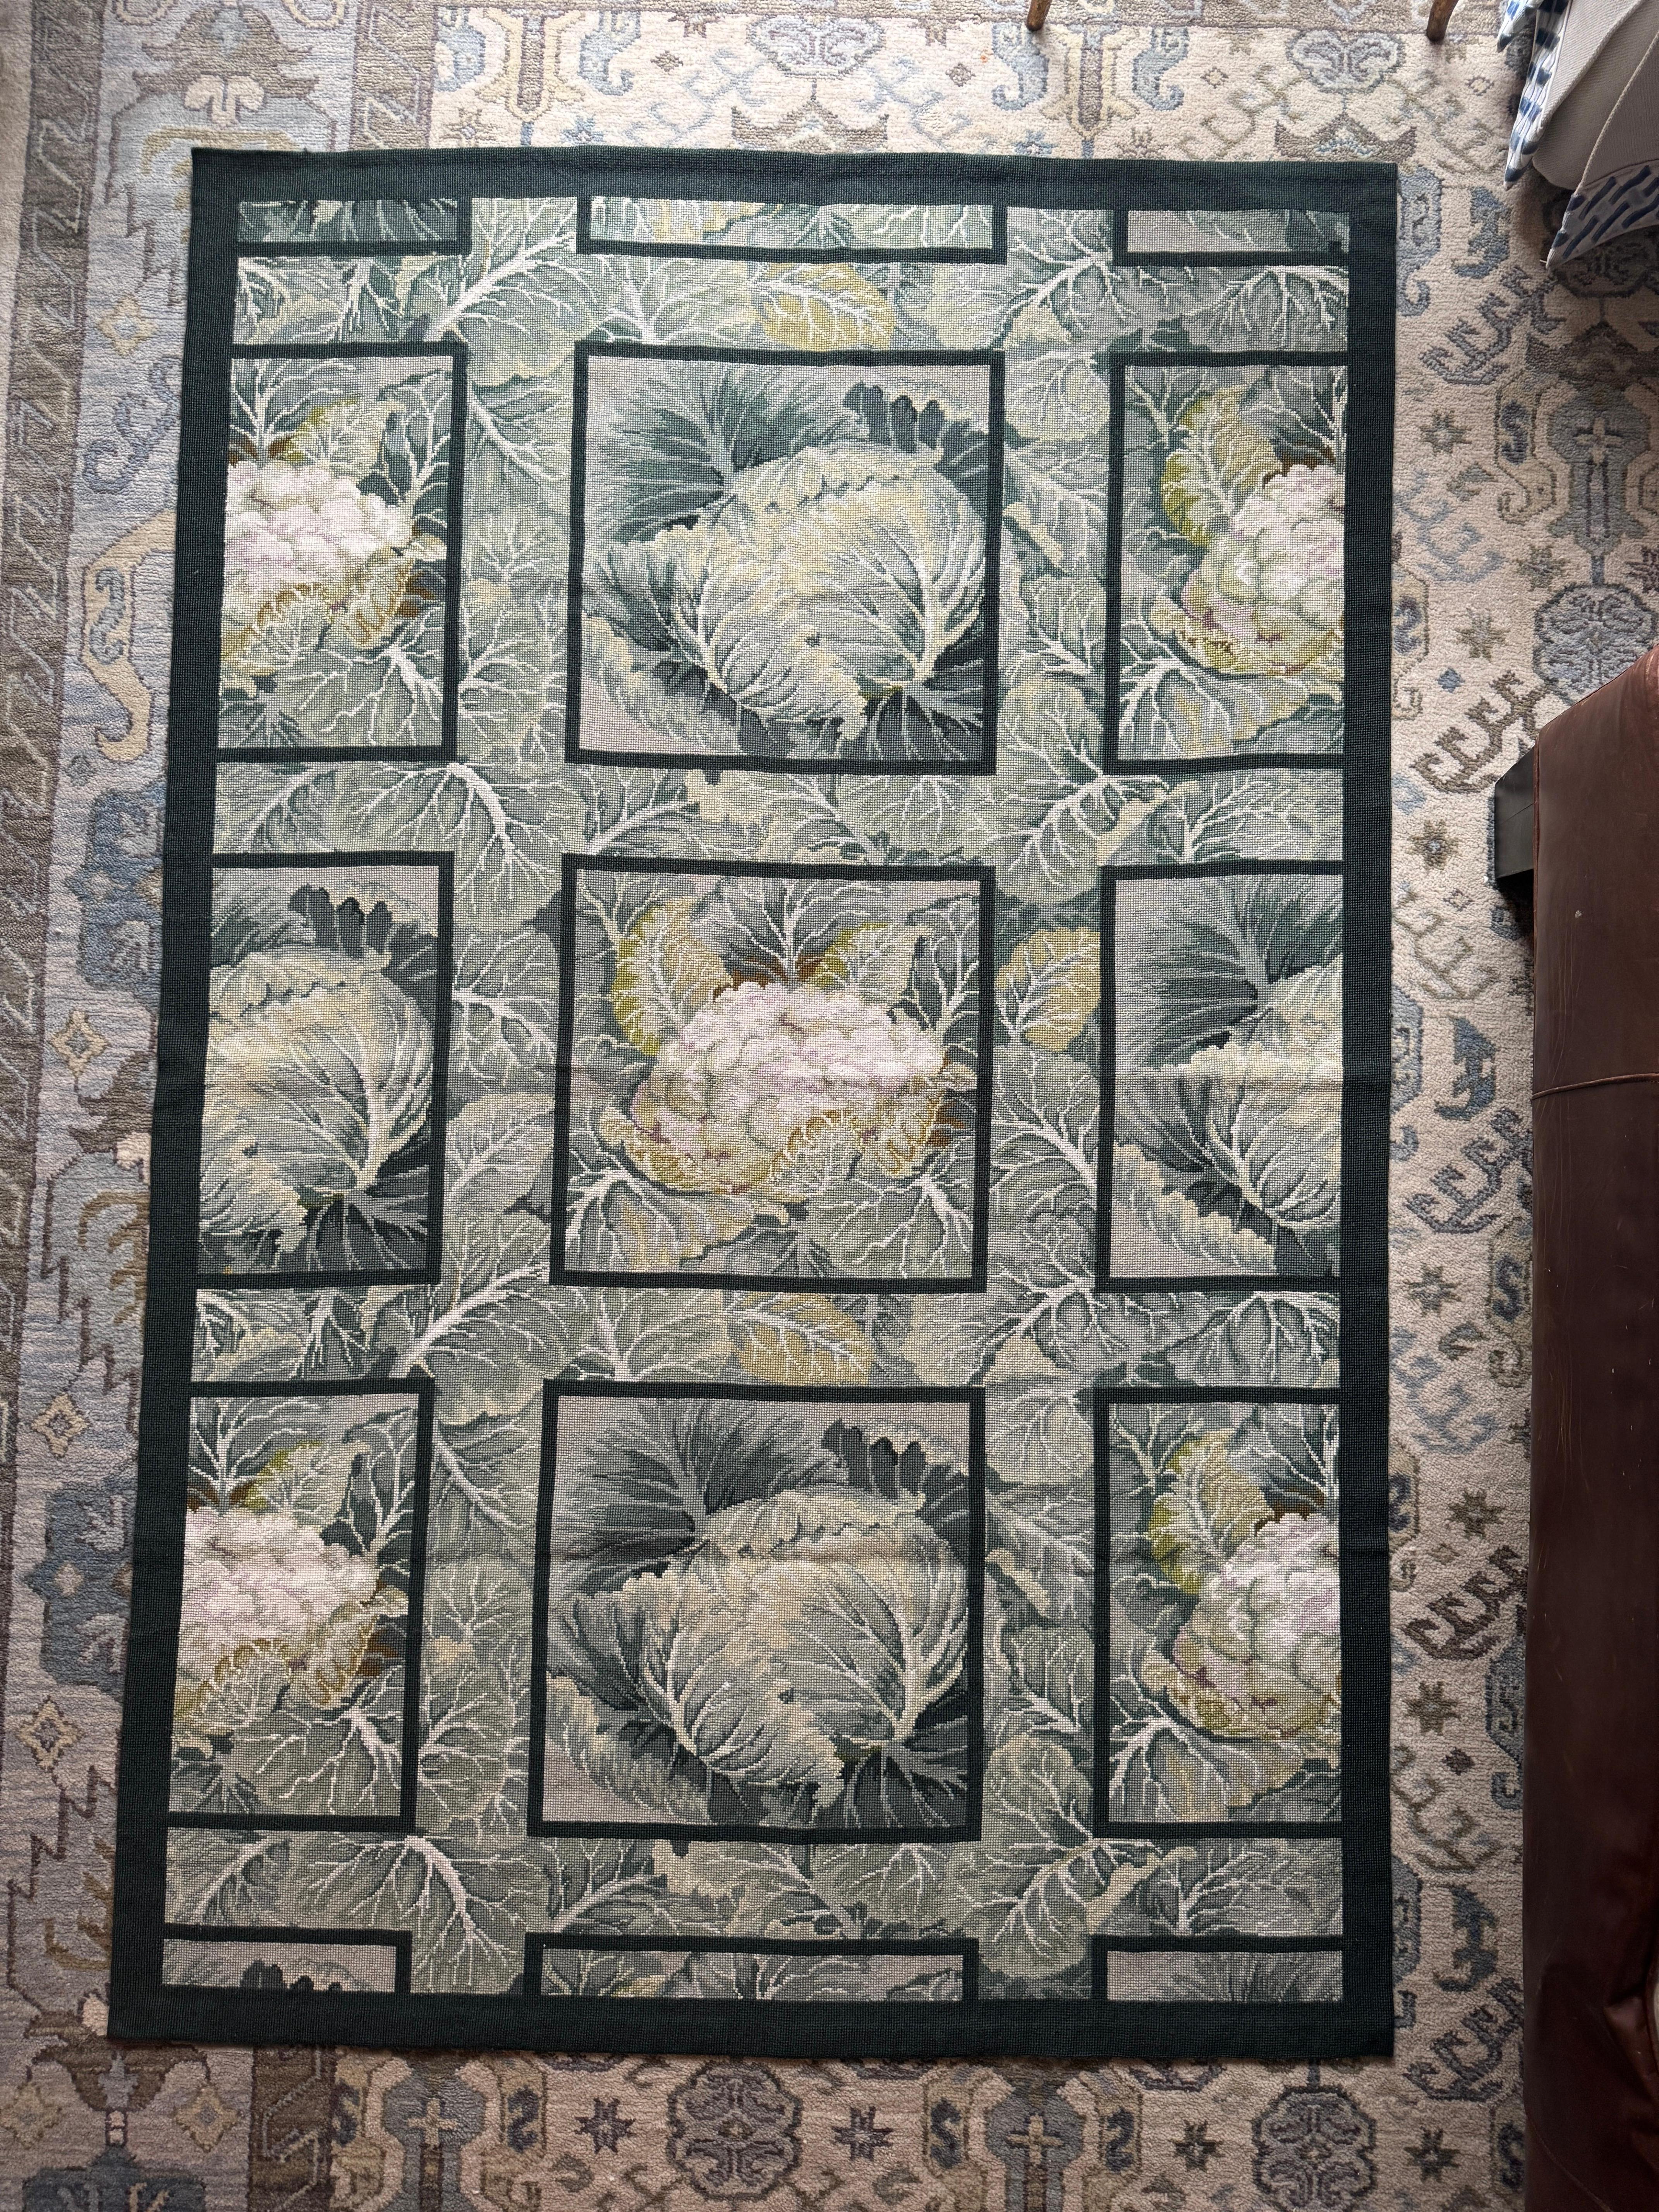 Offered is an exquisite 1990s needlepoint rug in rich shades of cream and green, depicting lettuce and cabbages in bordered squares. The styling and motif recalls the understated natural elegance of interiors by American style icon Bunny Mellon's